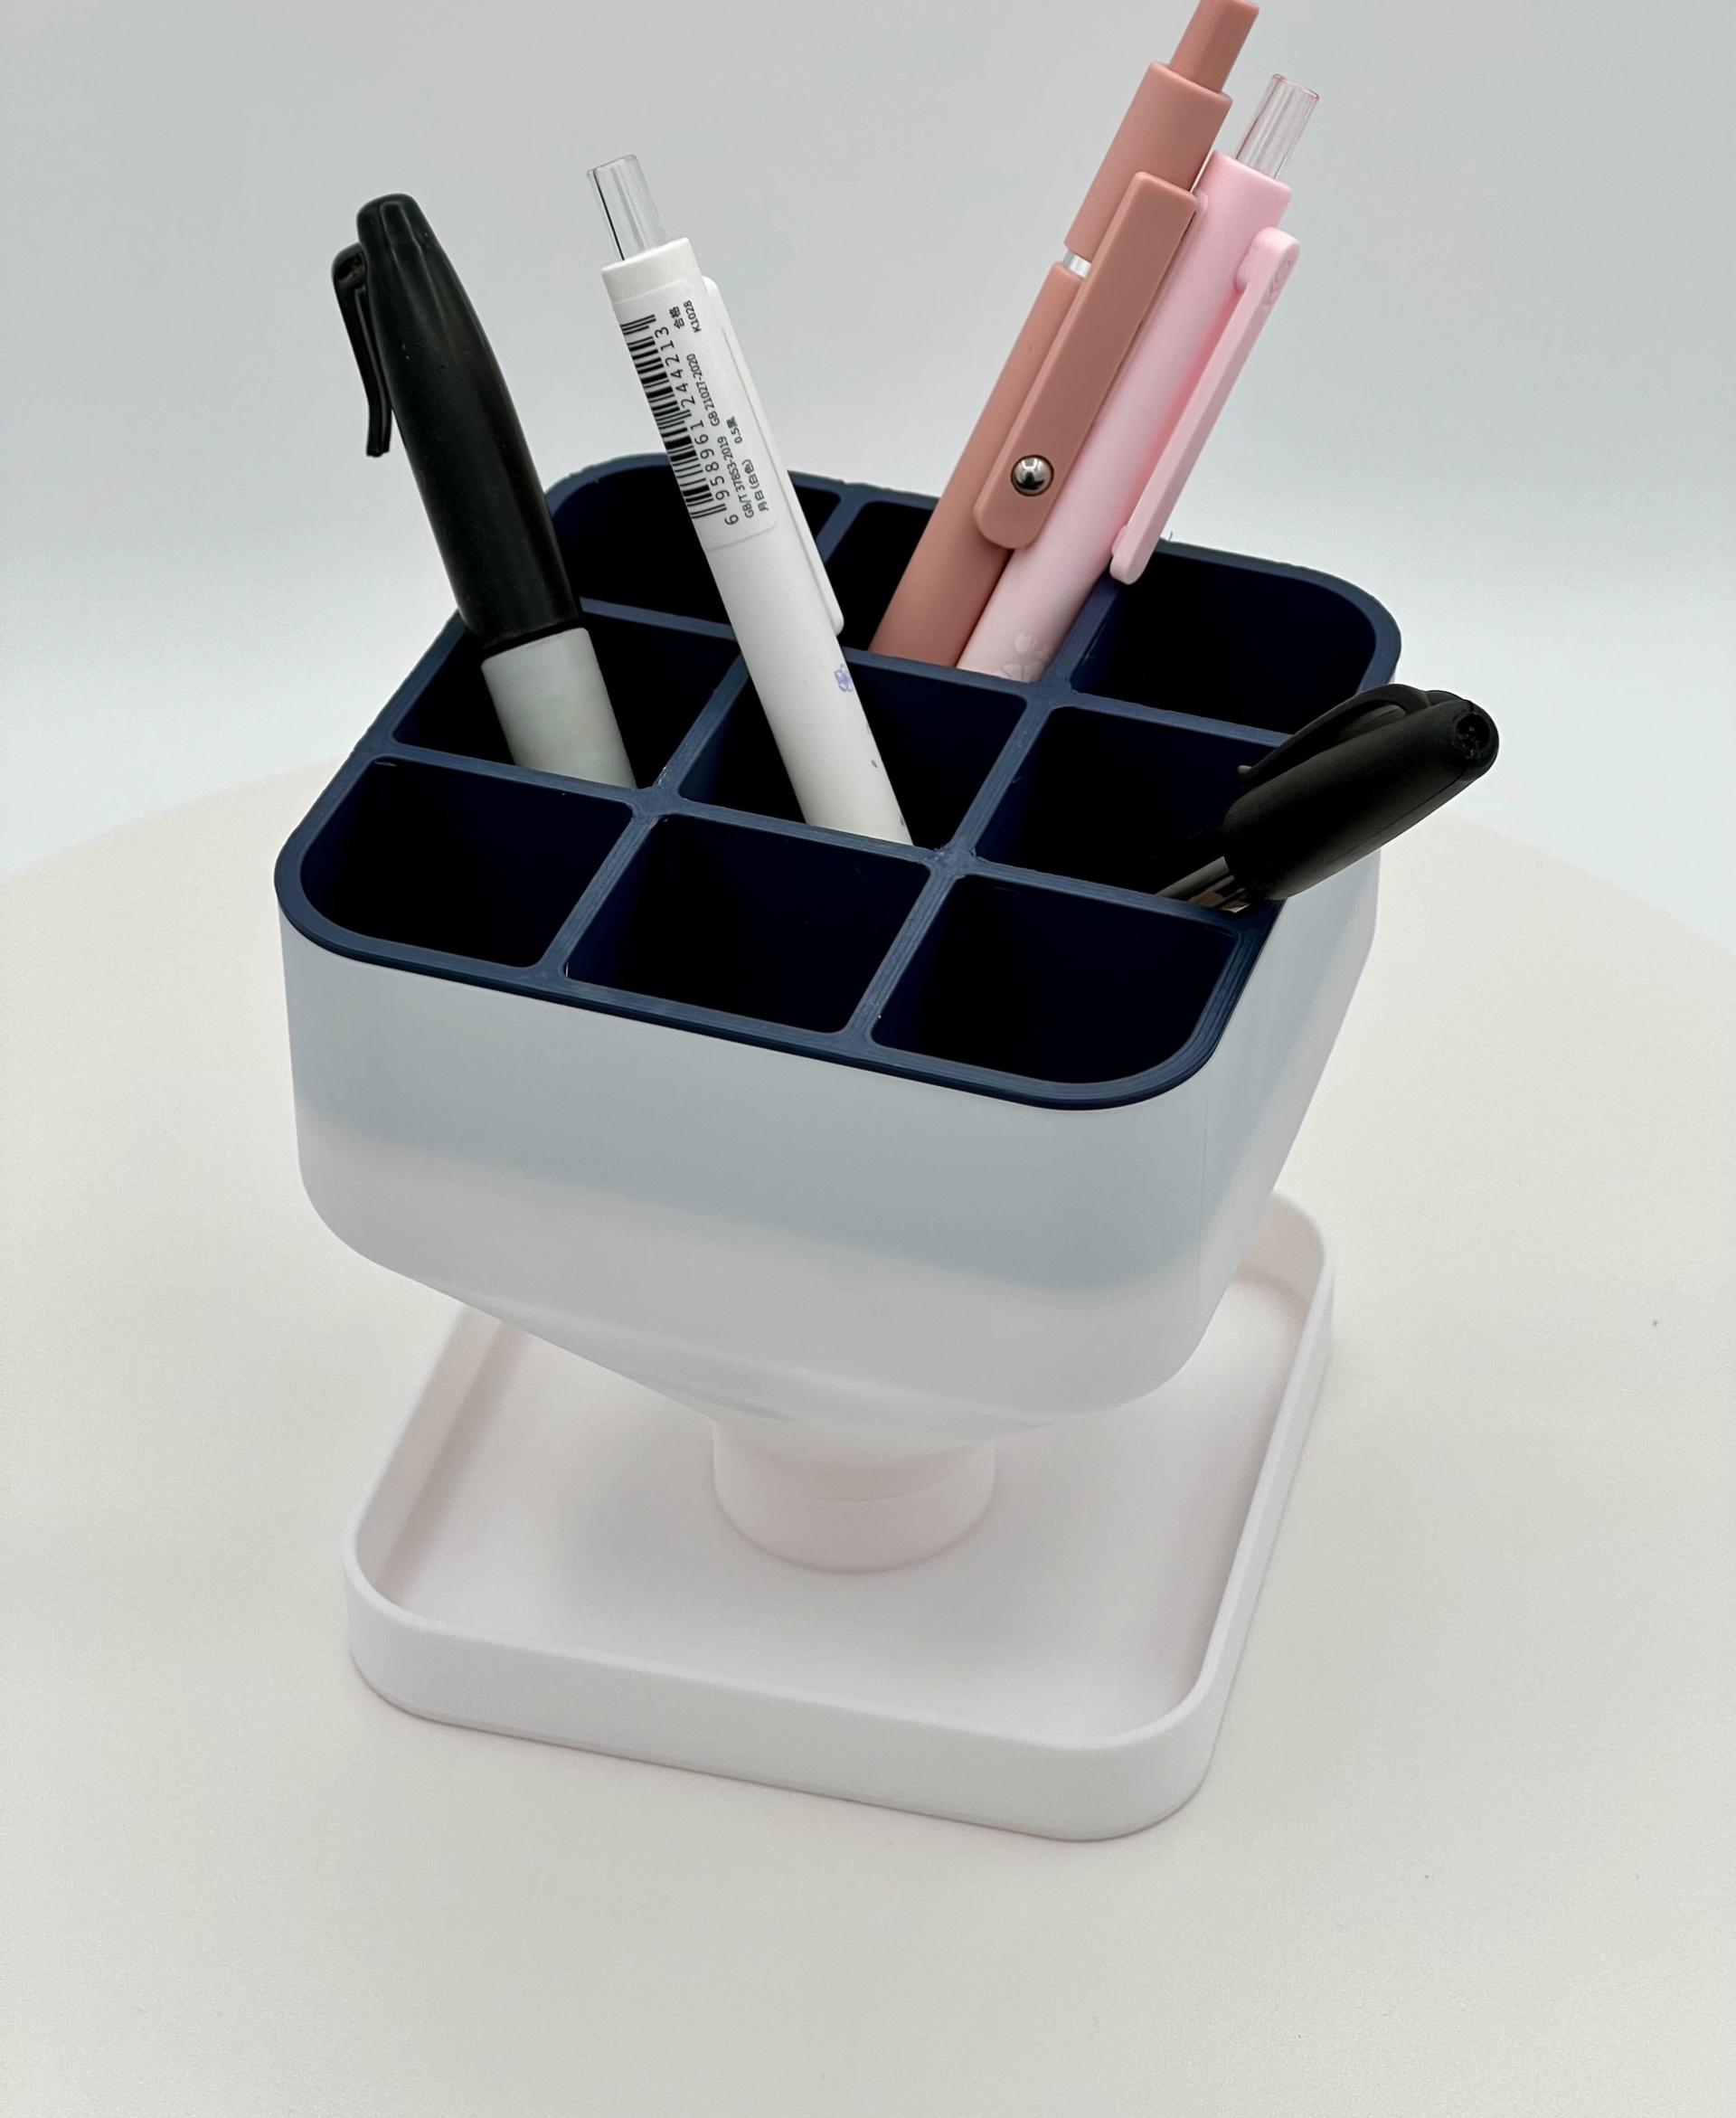 Desk Pen Holder - Printed at 50%, recommend 75% and a brim on the middle piece. 👍  - 3d model